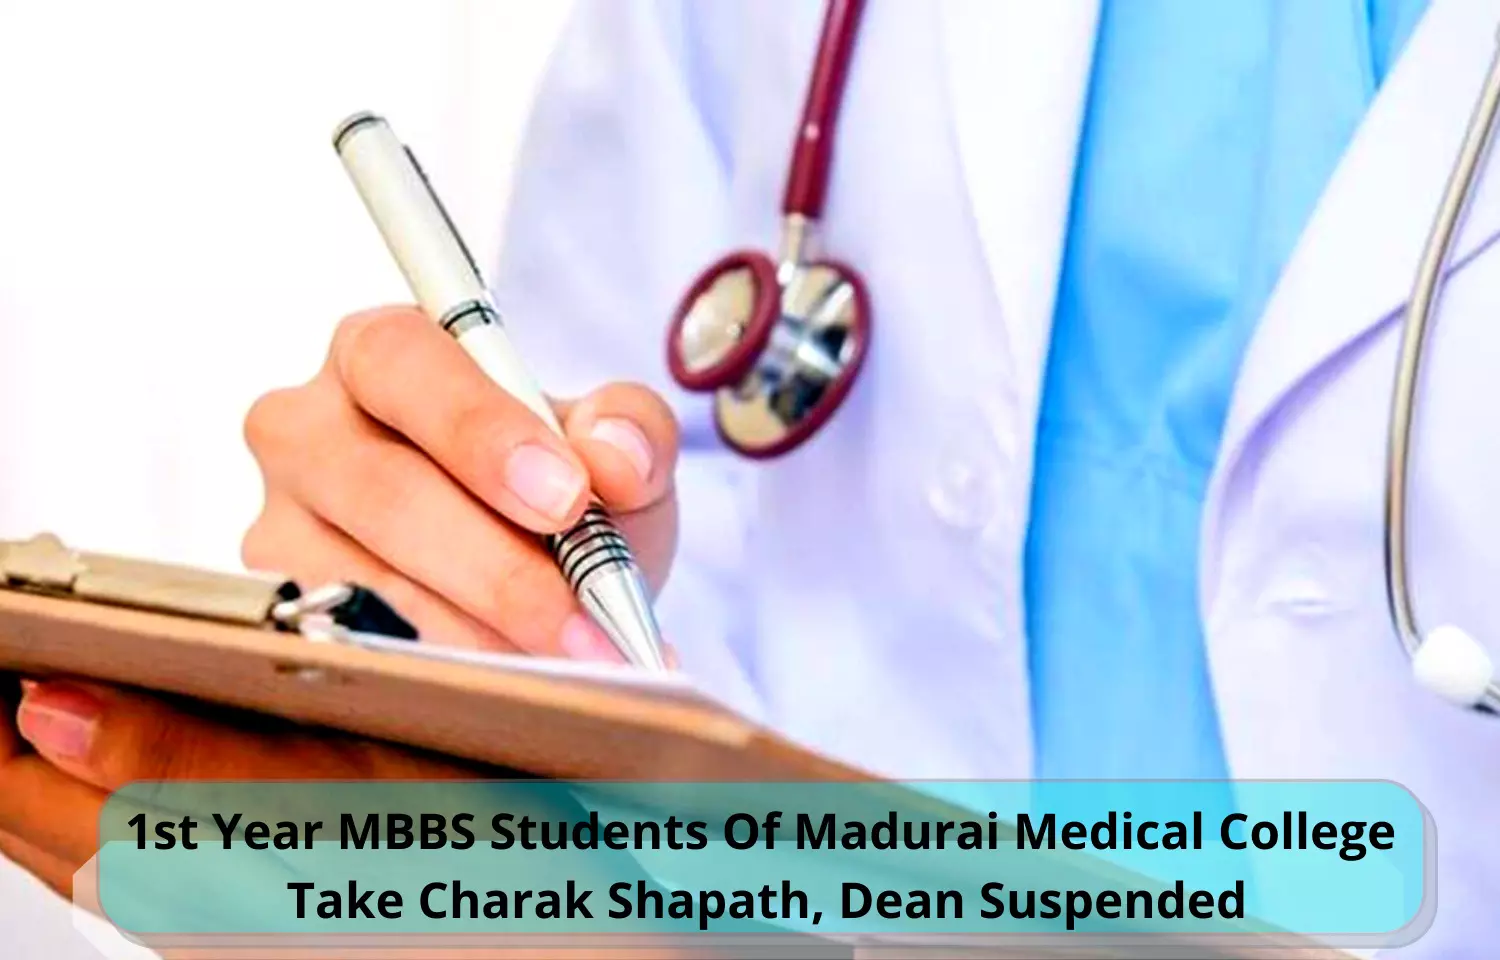 Madurai medical college dean suspended after MBBS students take Charak Shapath